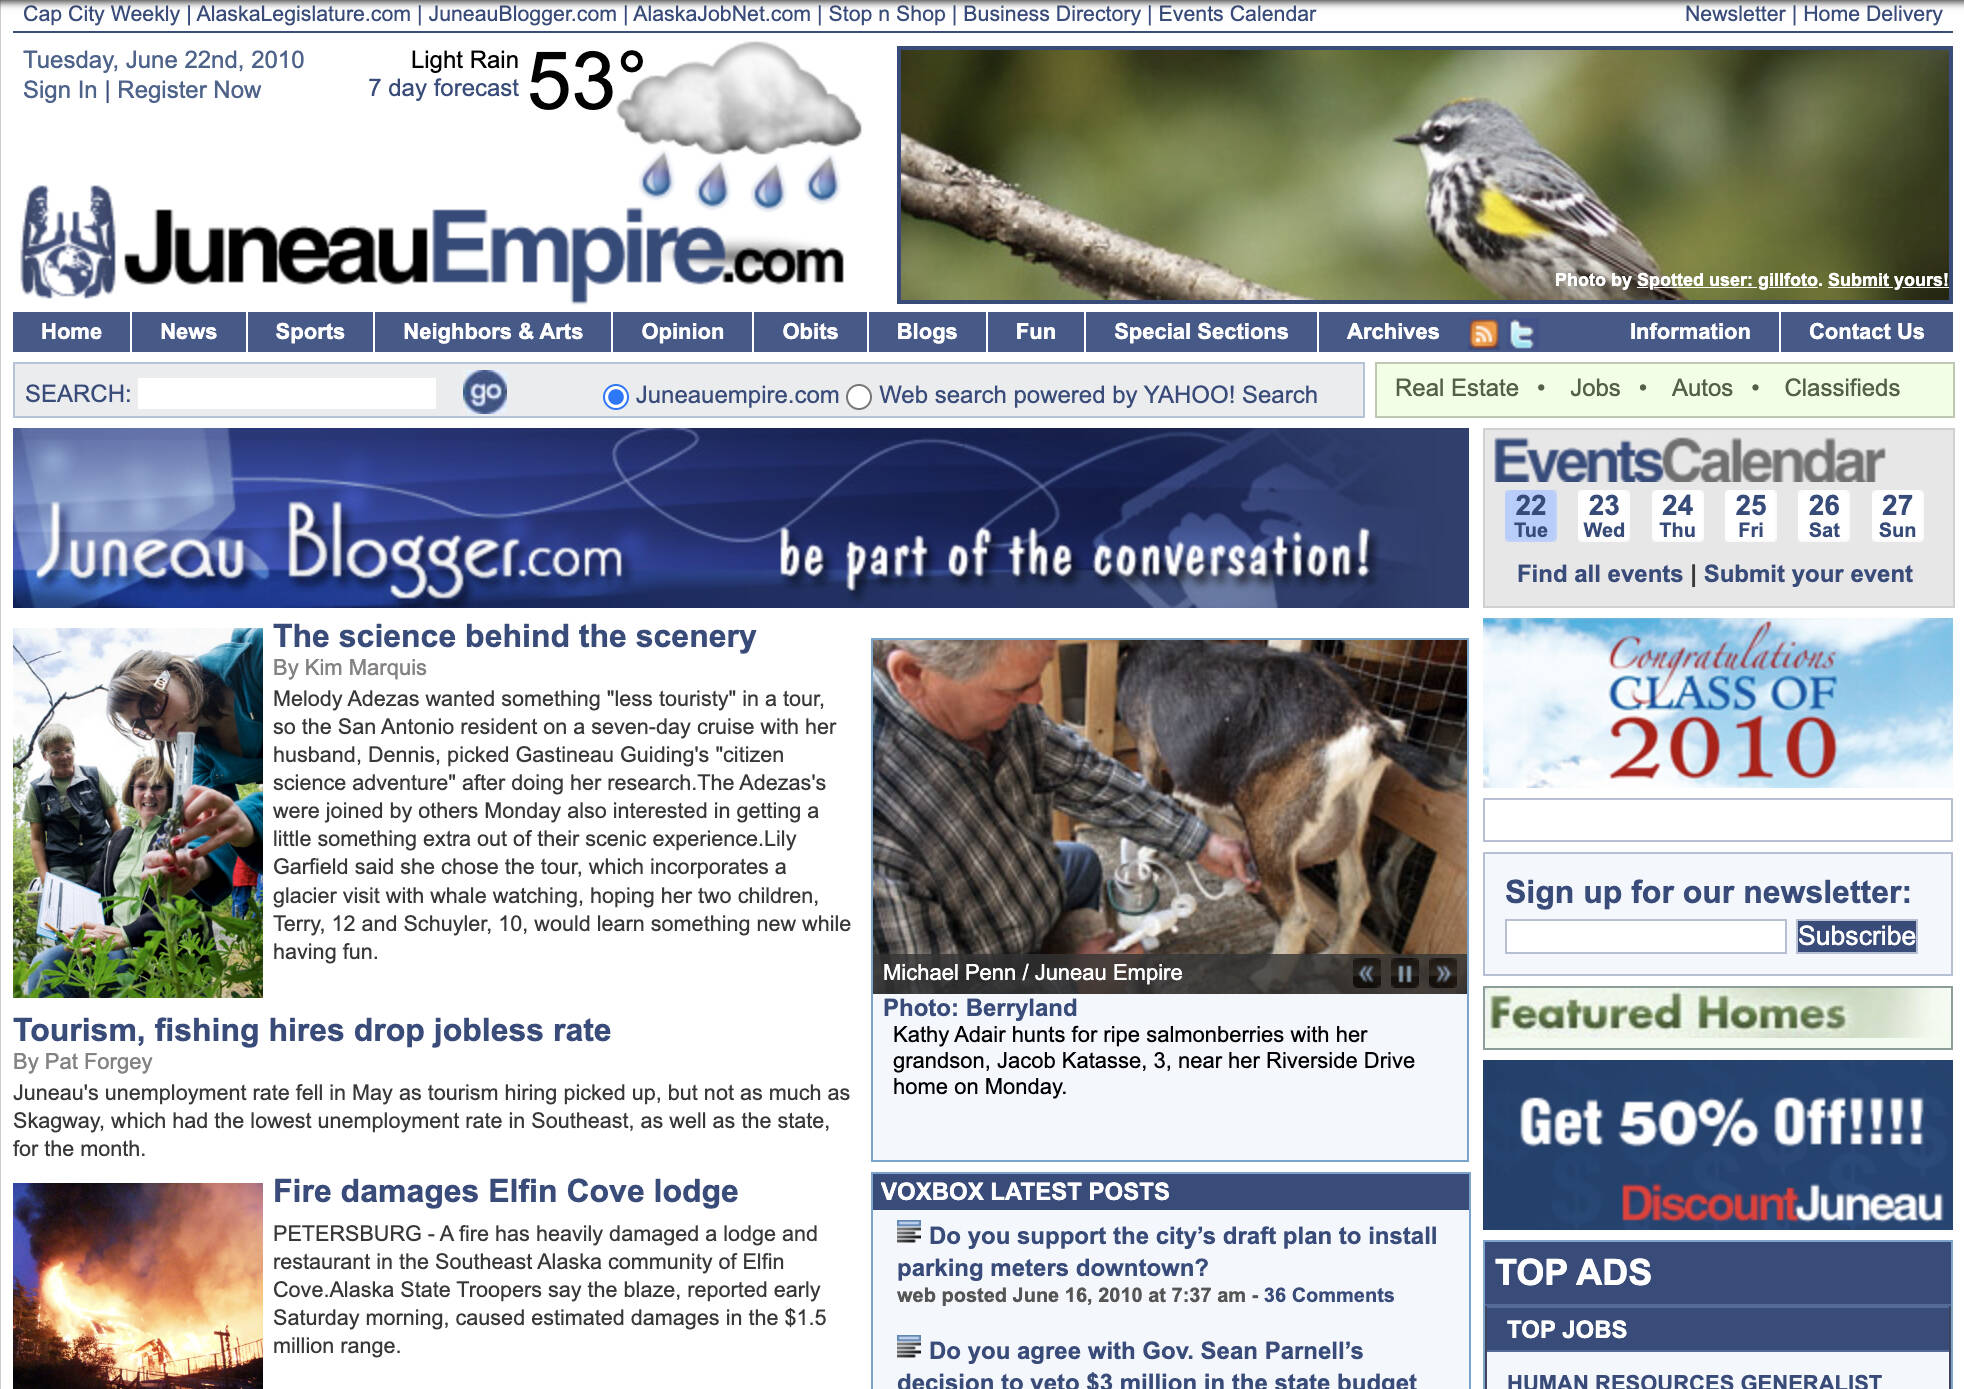 The Juneau Empire’s website takes another major jump forward in presentation and content by 2010. (Screenshot of juneauempire.com from the Internet Archive)